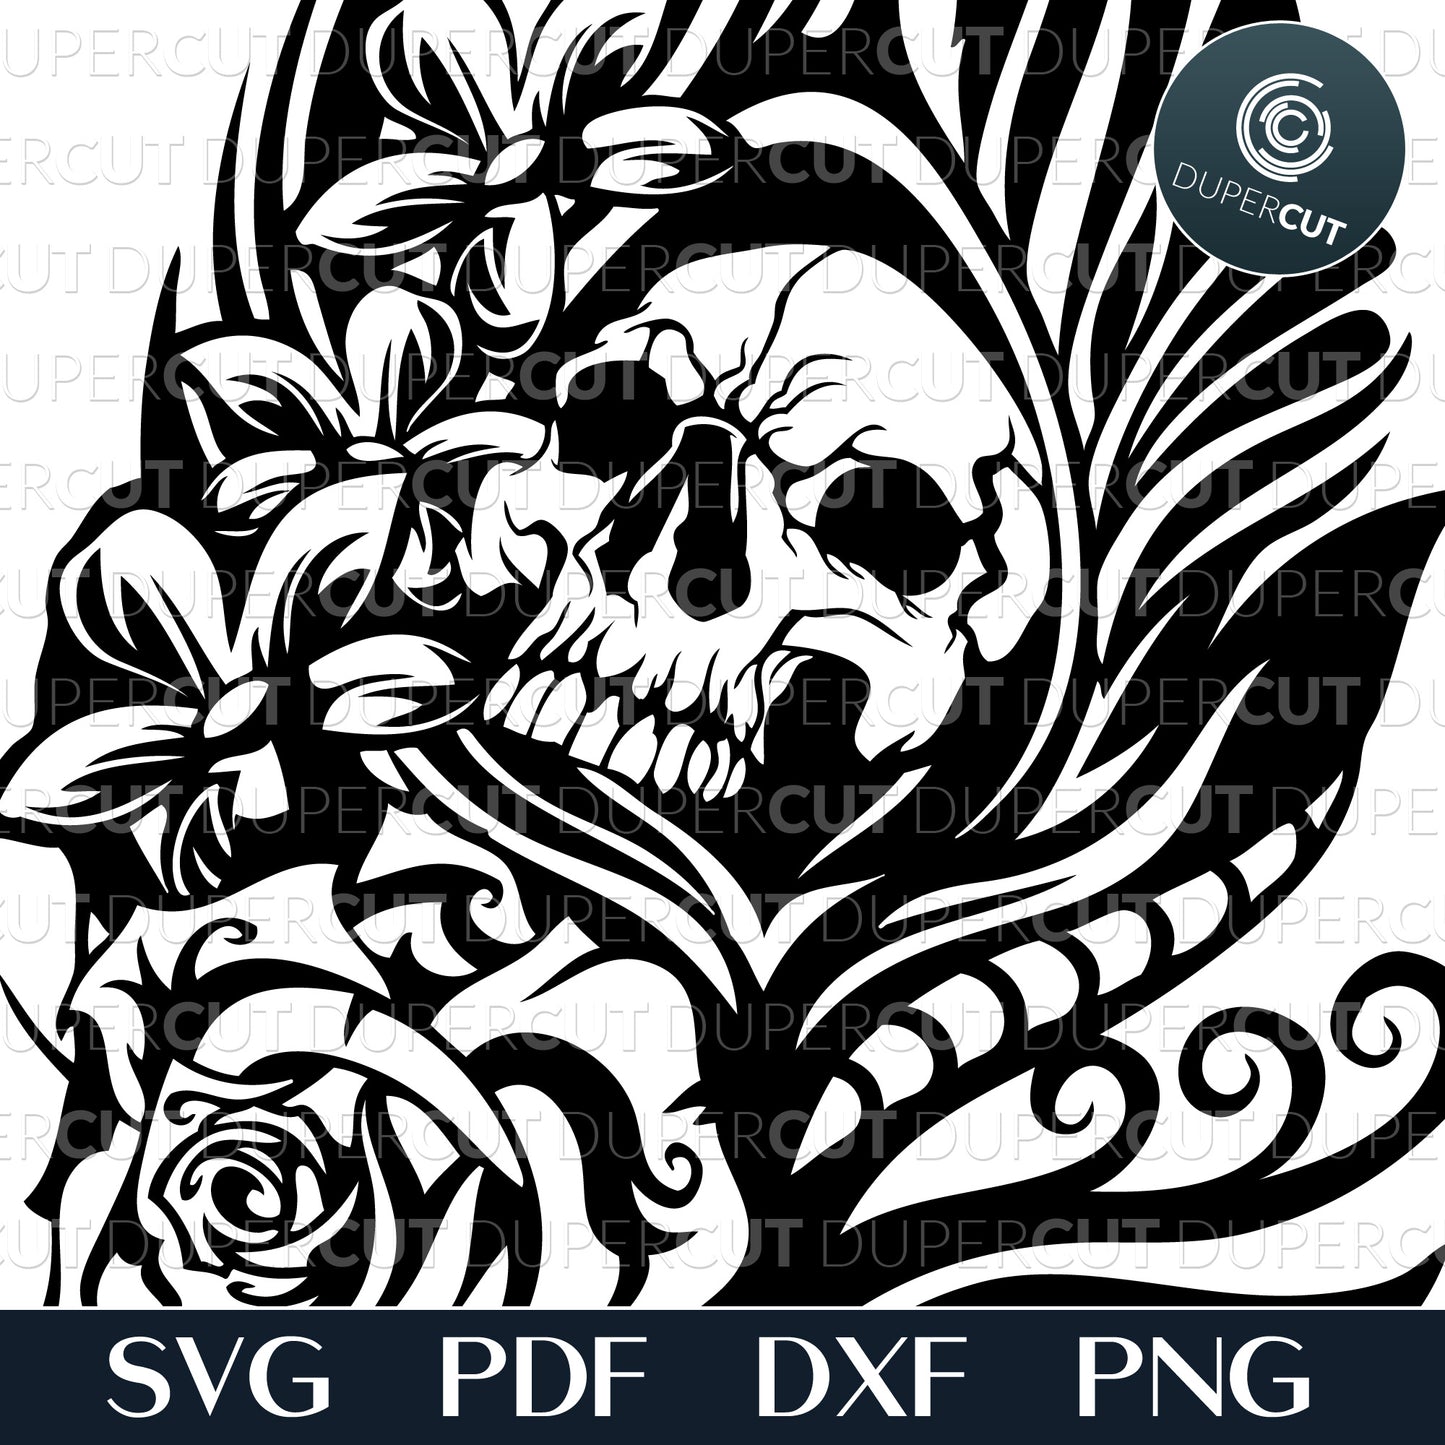 GOTHIC SKULL FEATHER - SVG / PDF / DXF / PNG